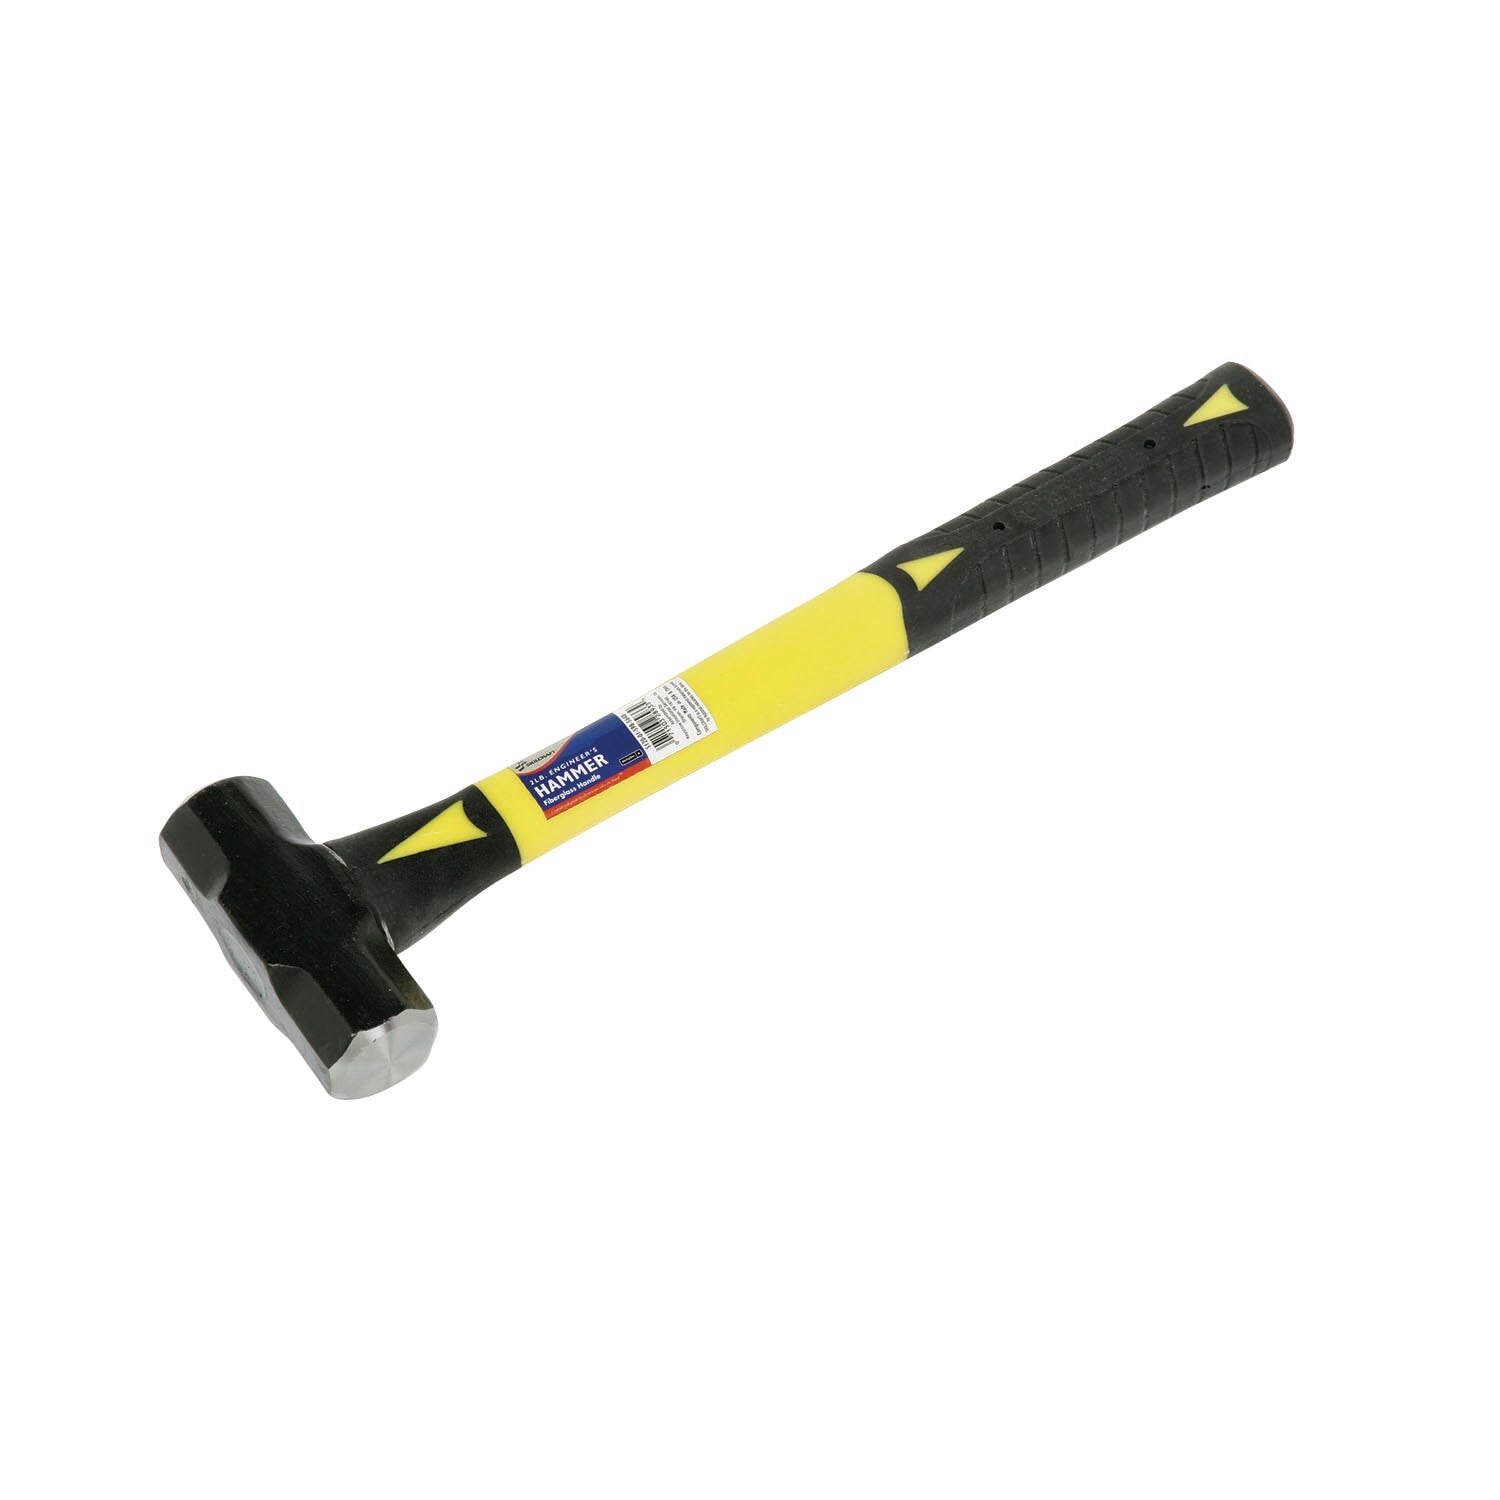 1 Pc of 6894540 Double Face Sledge Hammer,2-1/2lb,14inL 